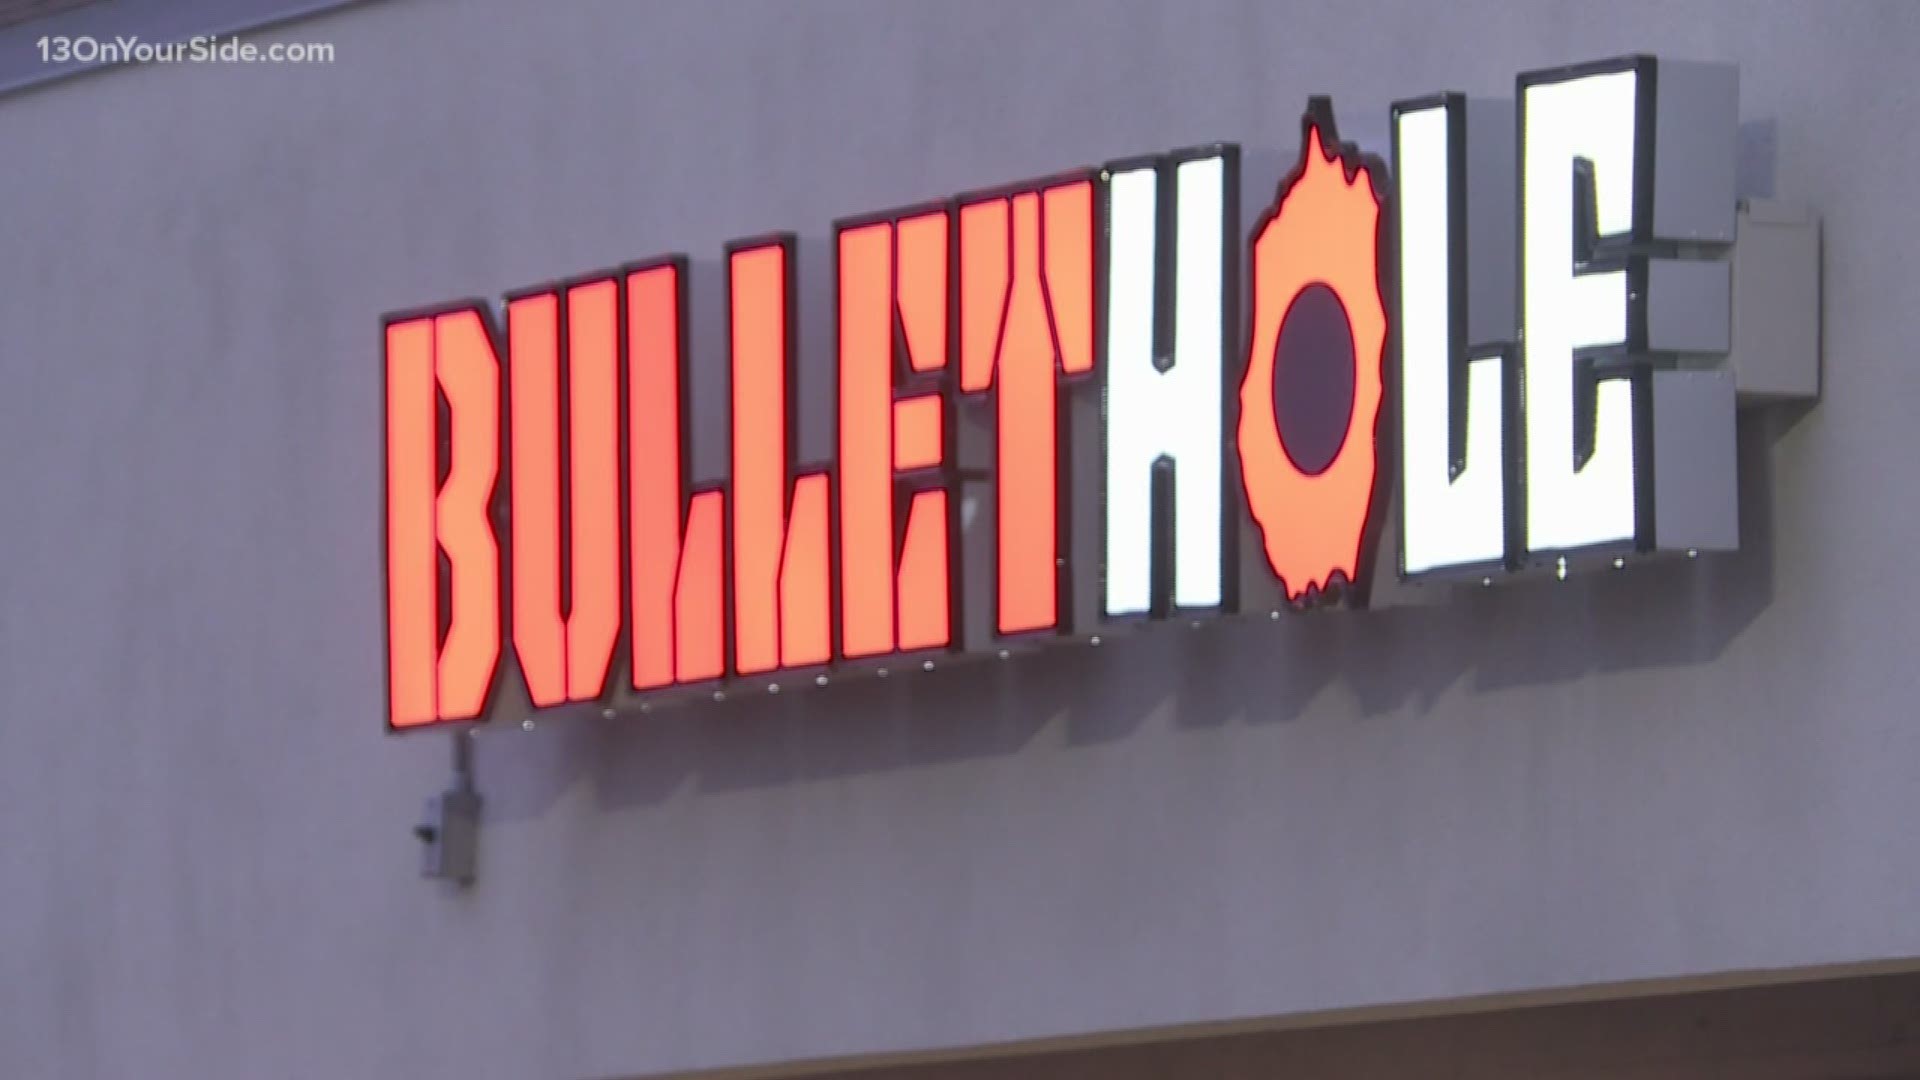 Authorities in Holland are investigating an attempted break-in at a gun store Monday morning.